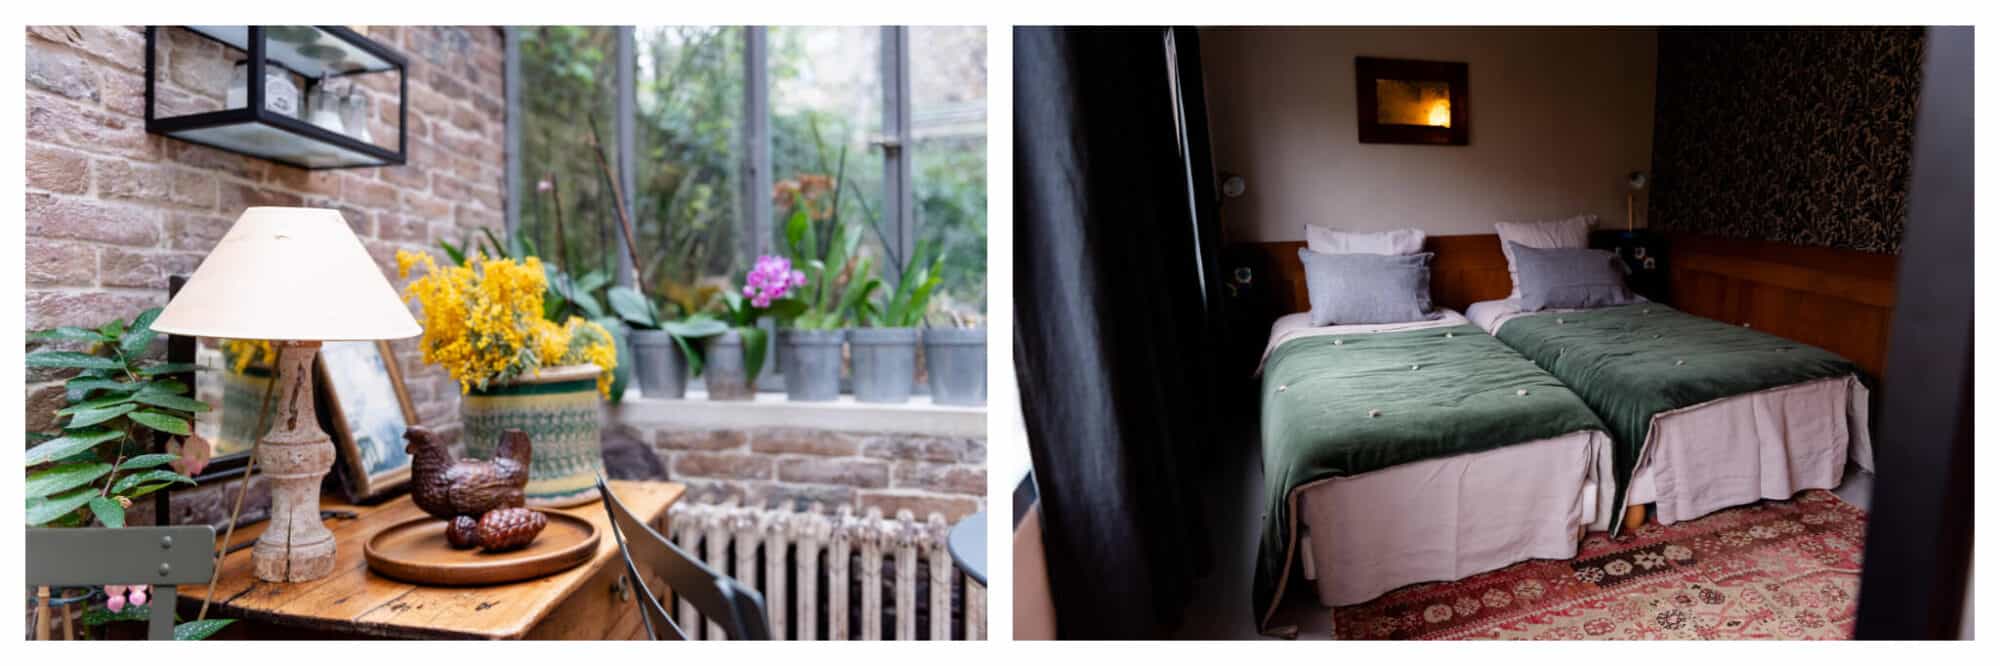 Left: Assorted items sit on a small wooden table, including a lamp and vase of yellow flowers. To the right is a windowsill lined with potted plants, Right: Two beds, decorated with gray pillows and green blankets, sit side-by-side at Le 66 in Paris.